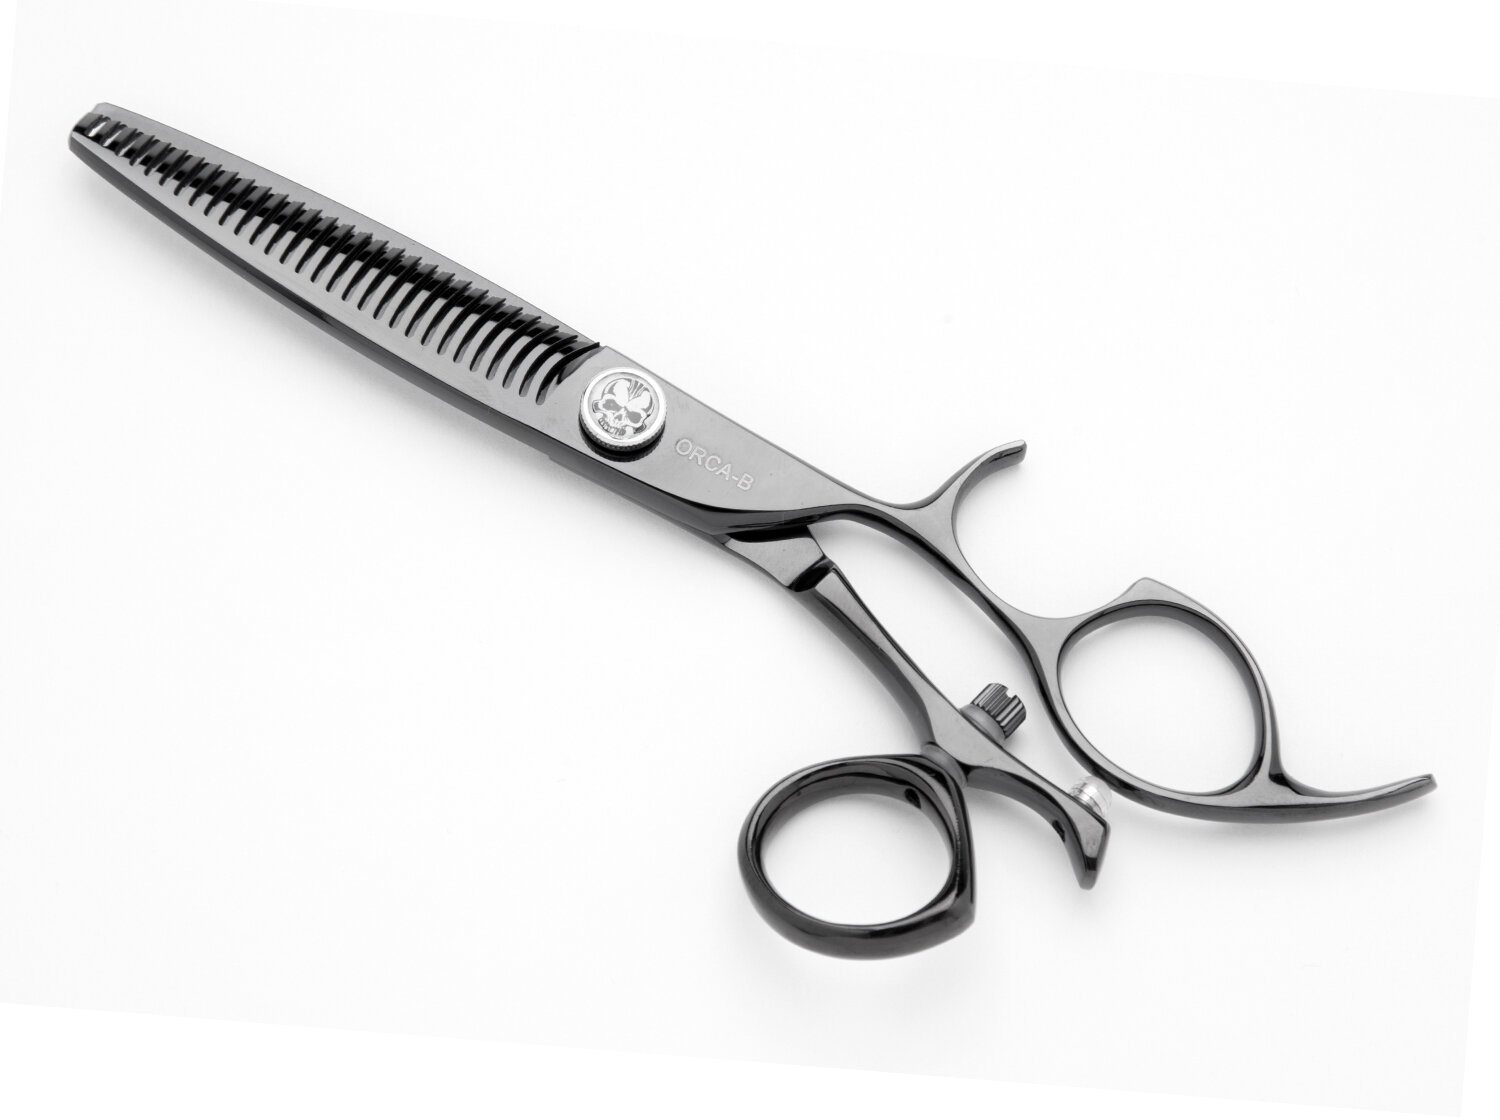 Hair Shear Sharpening Need Signs and Common Errors, Part 3